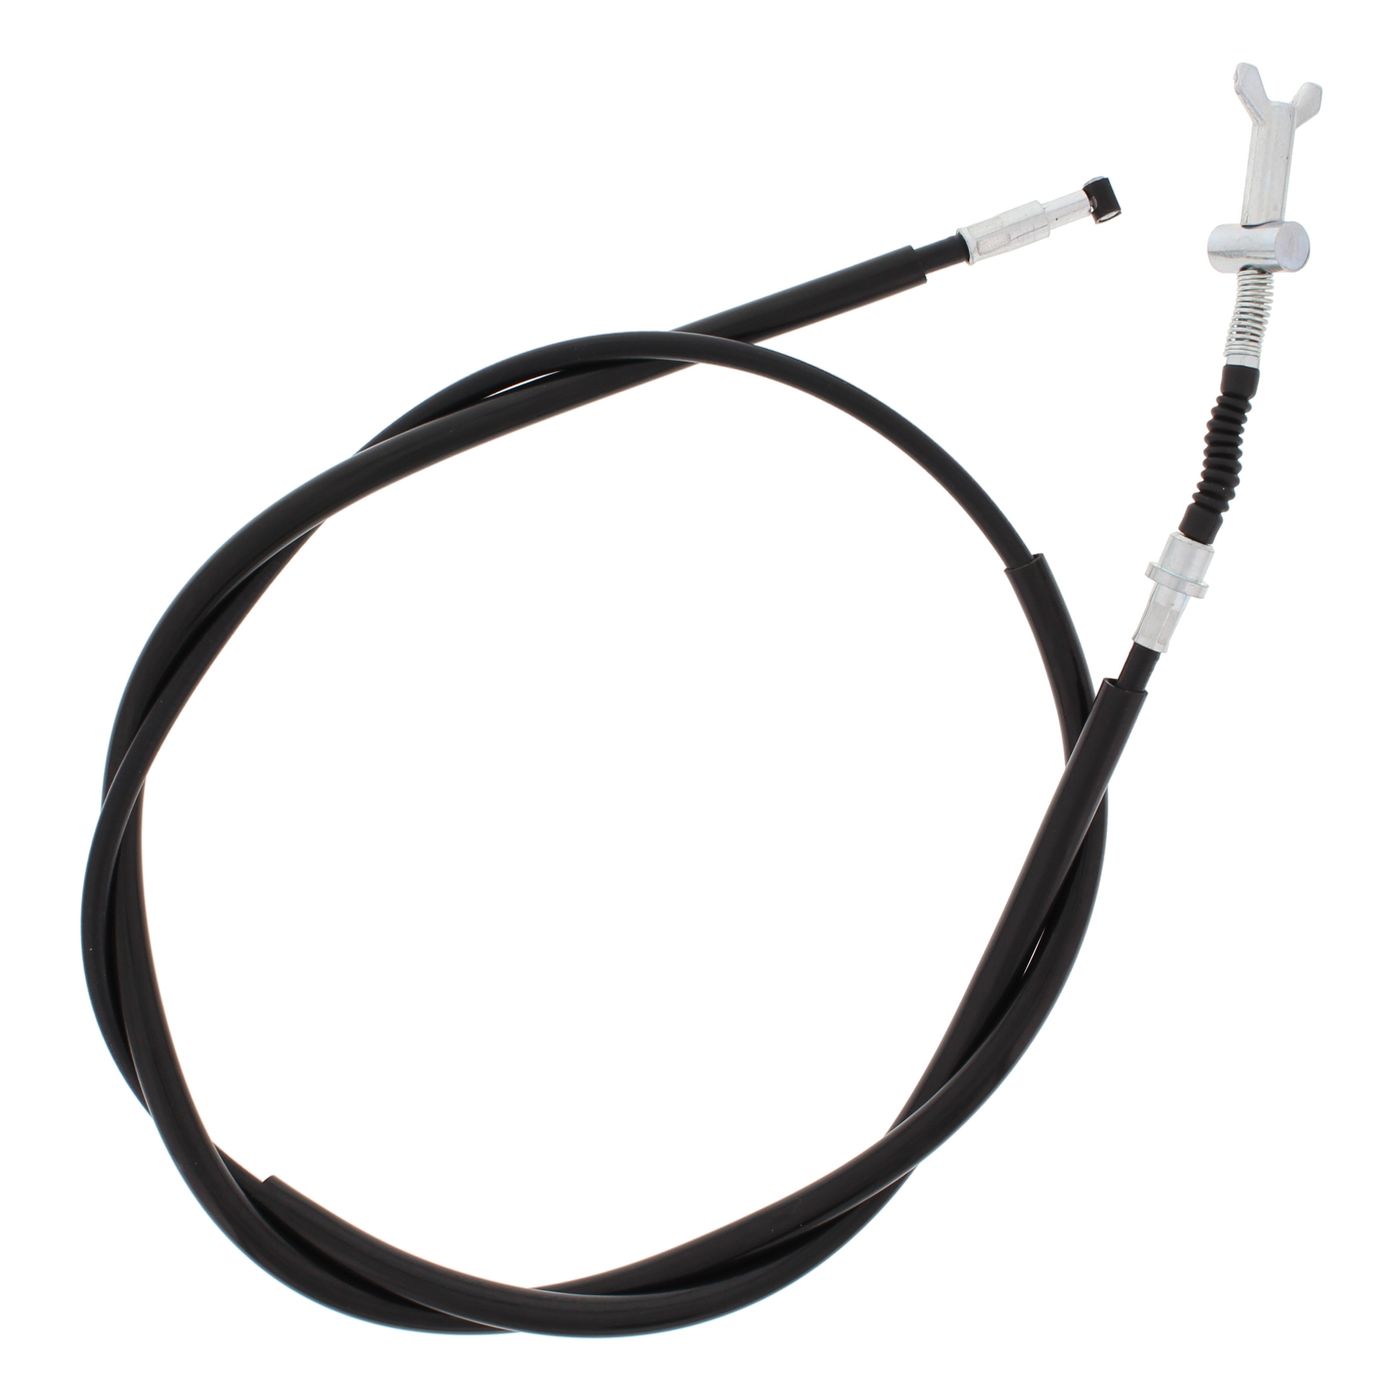 Wrp Brake Cables - WRP454015 image